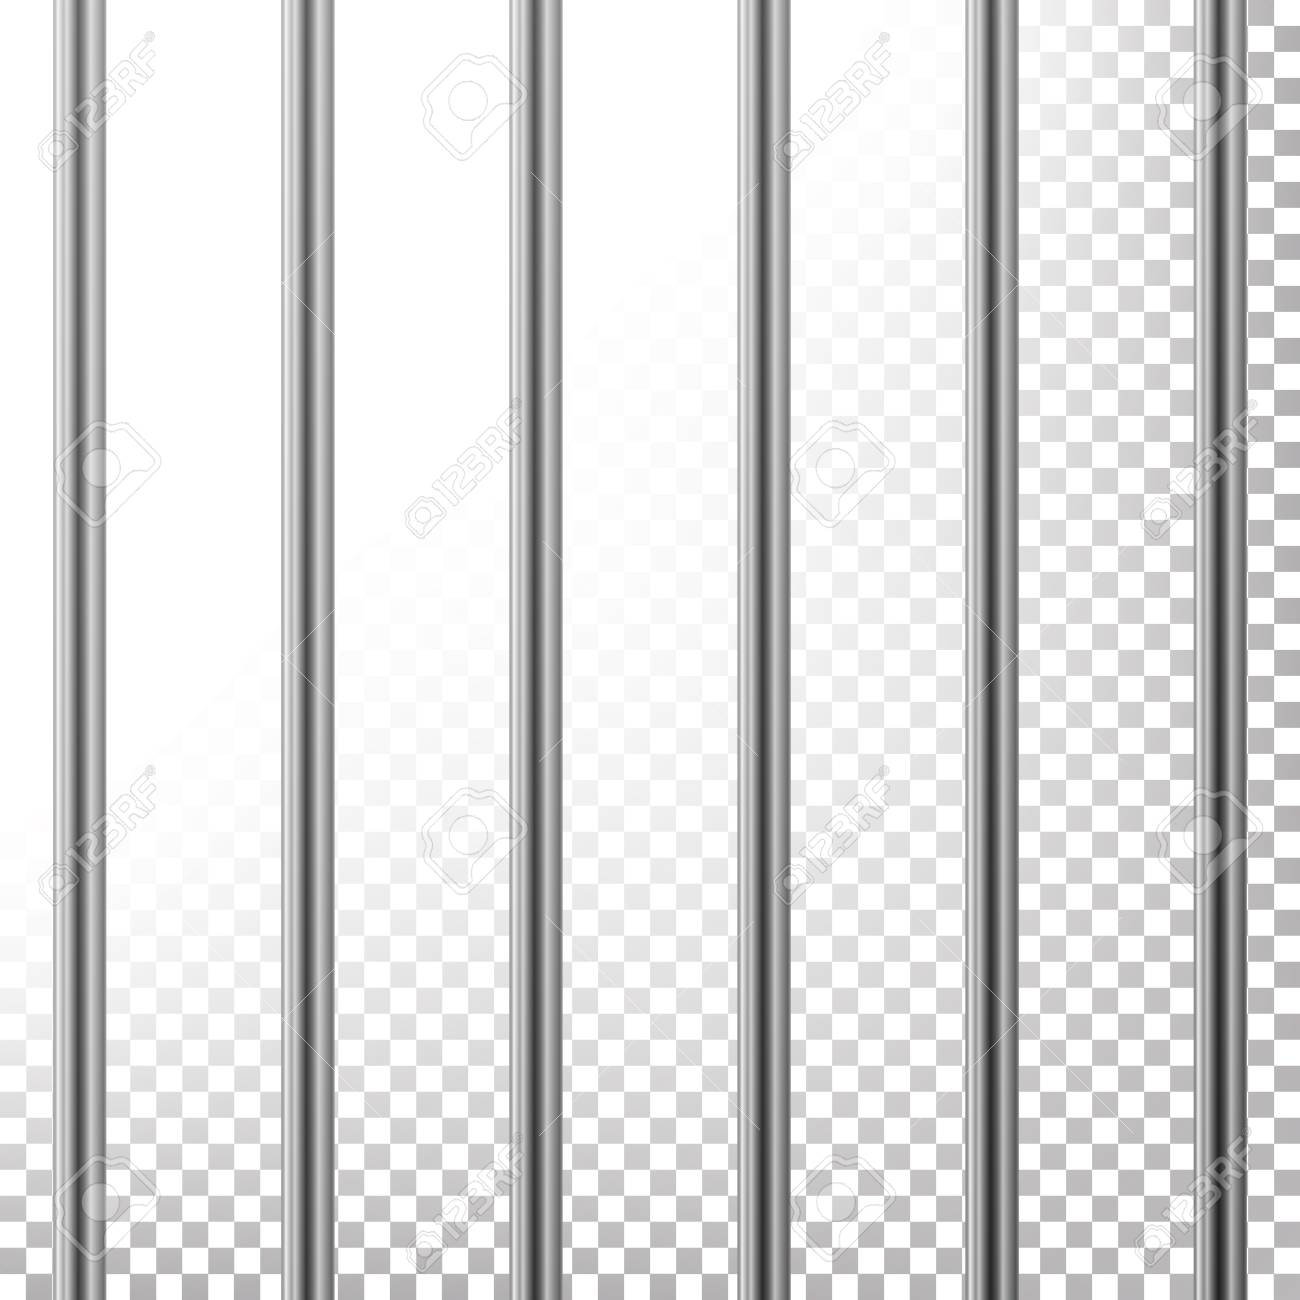 Metal Prison Bars Vector Isolated On Transparent Background